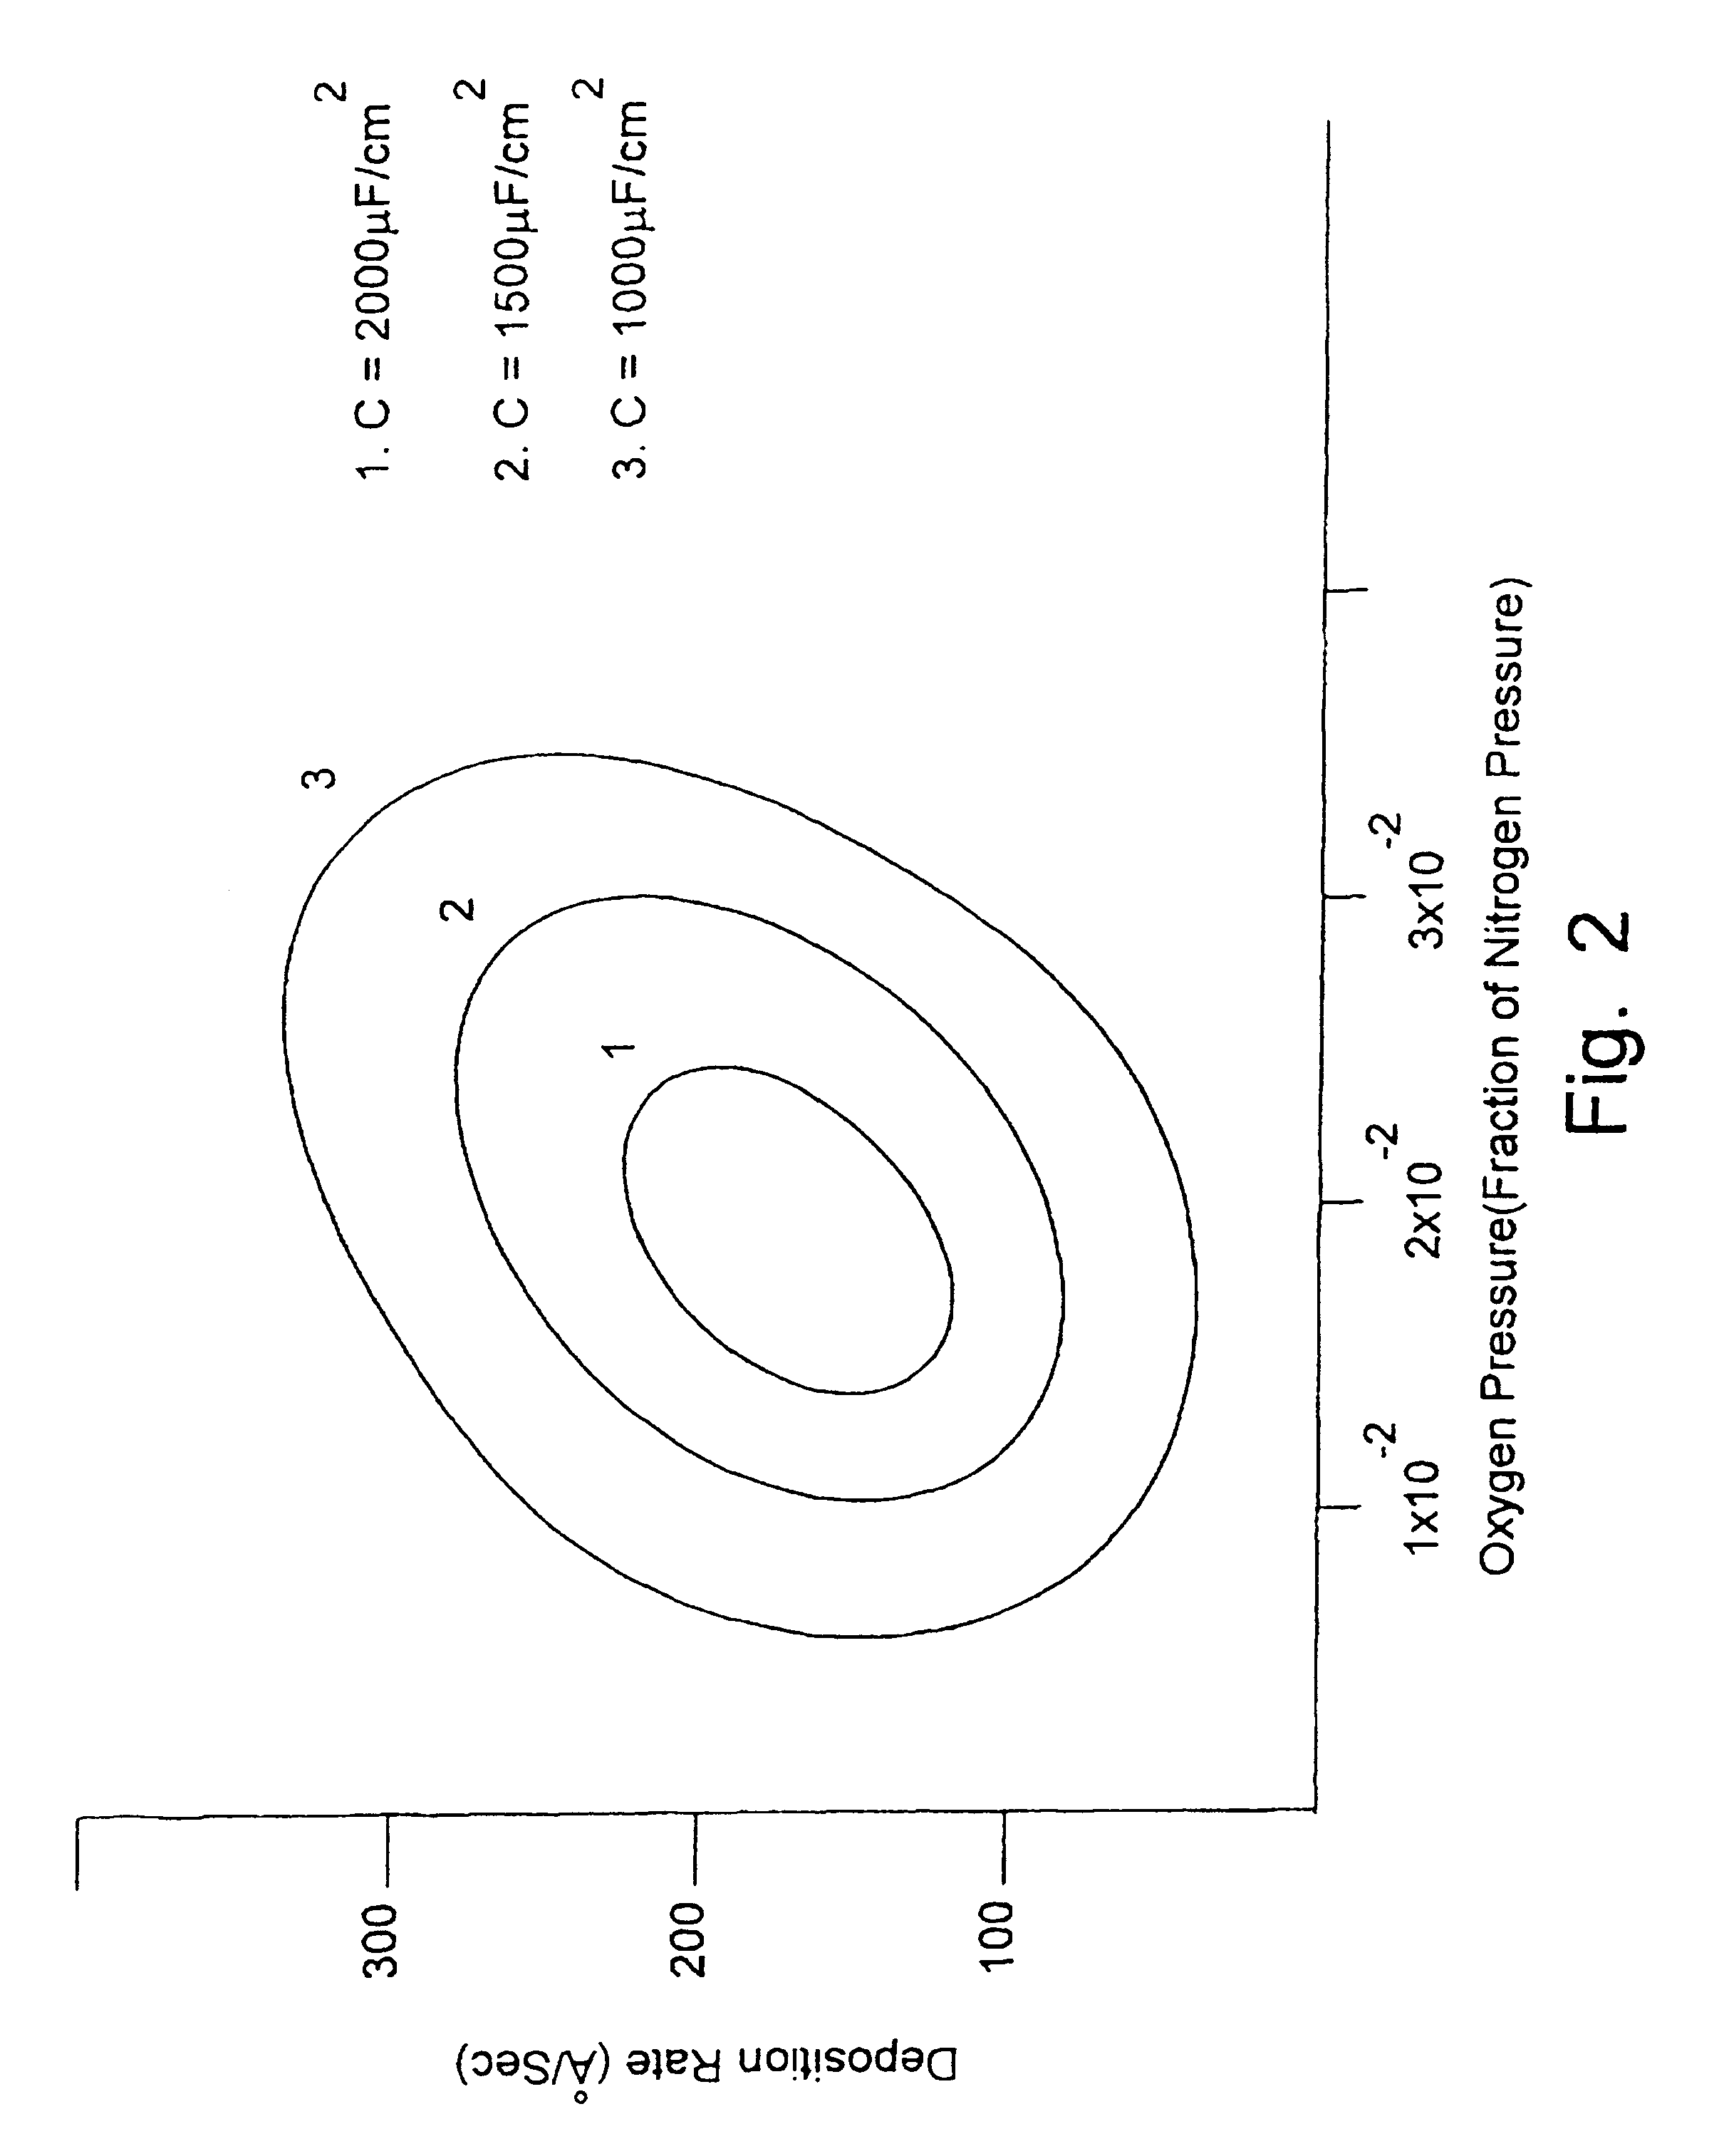 Method for producing high surface area foil electrodes